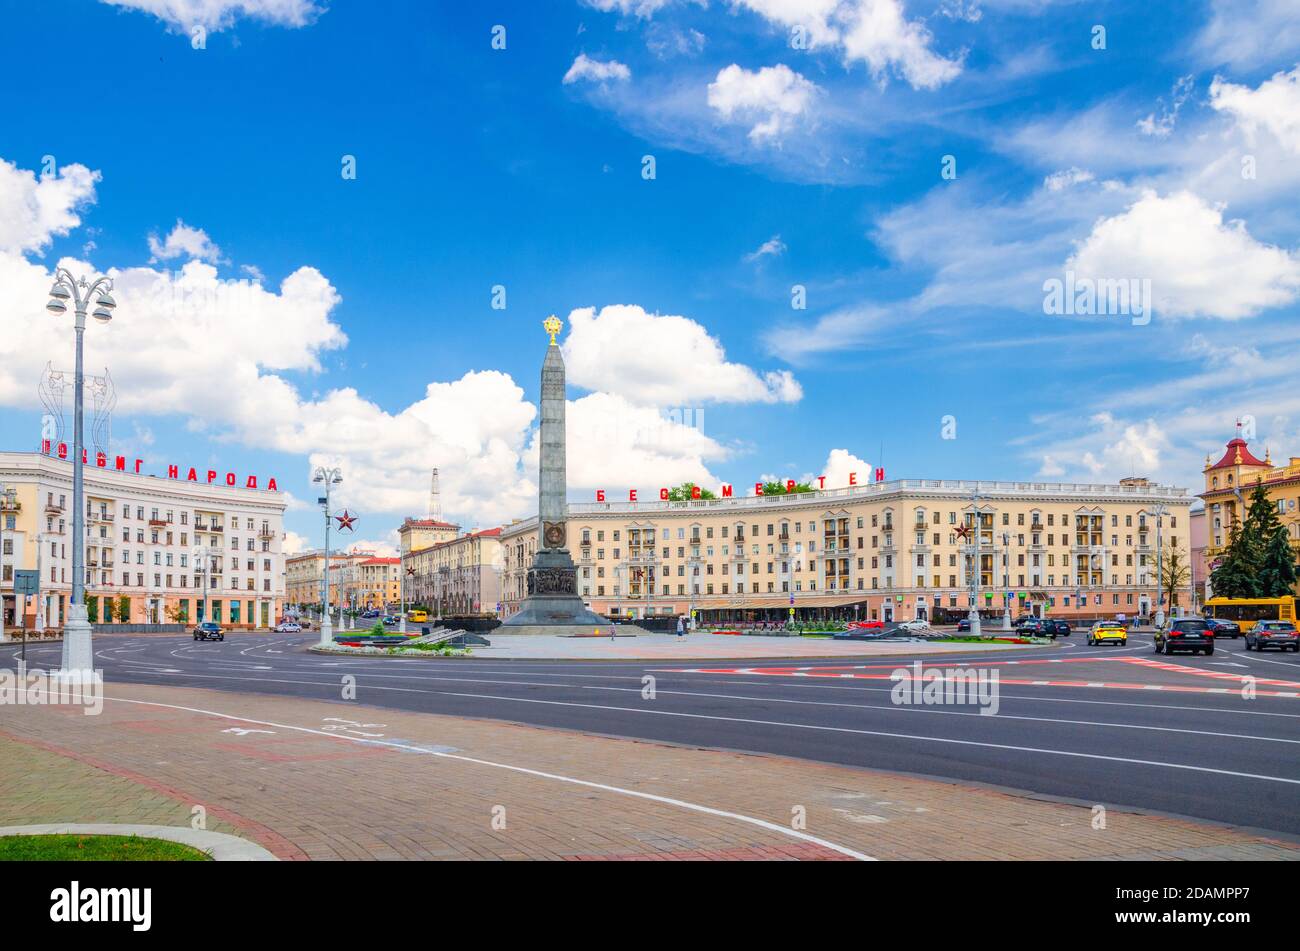 Minsk, Belarus, July 26, 2020: Victory Square in city centre with Granite Monument of Victory, red letters on buildings read Heroic deed of the people is immortal , blue sky white clouds sunny day Stock Photo